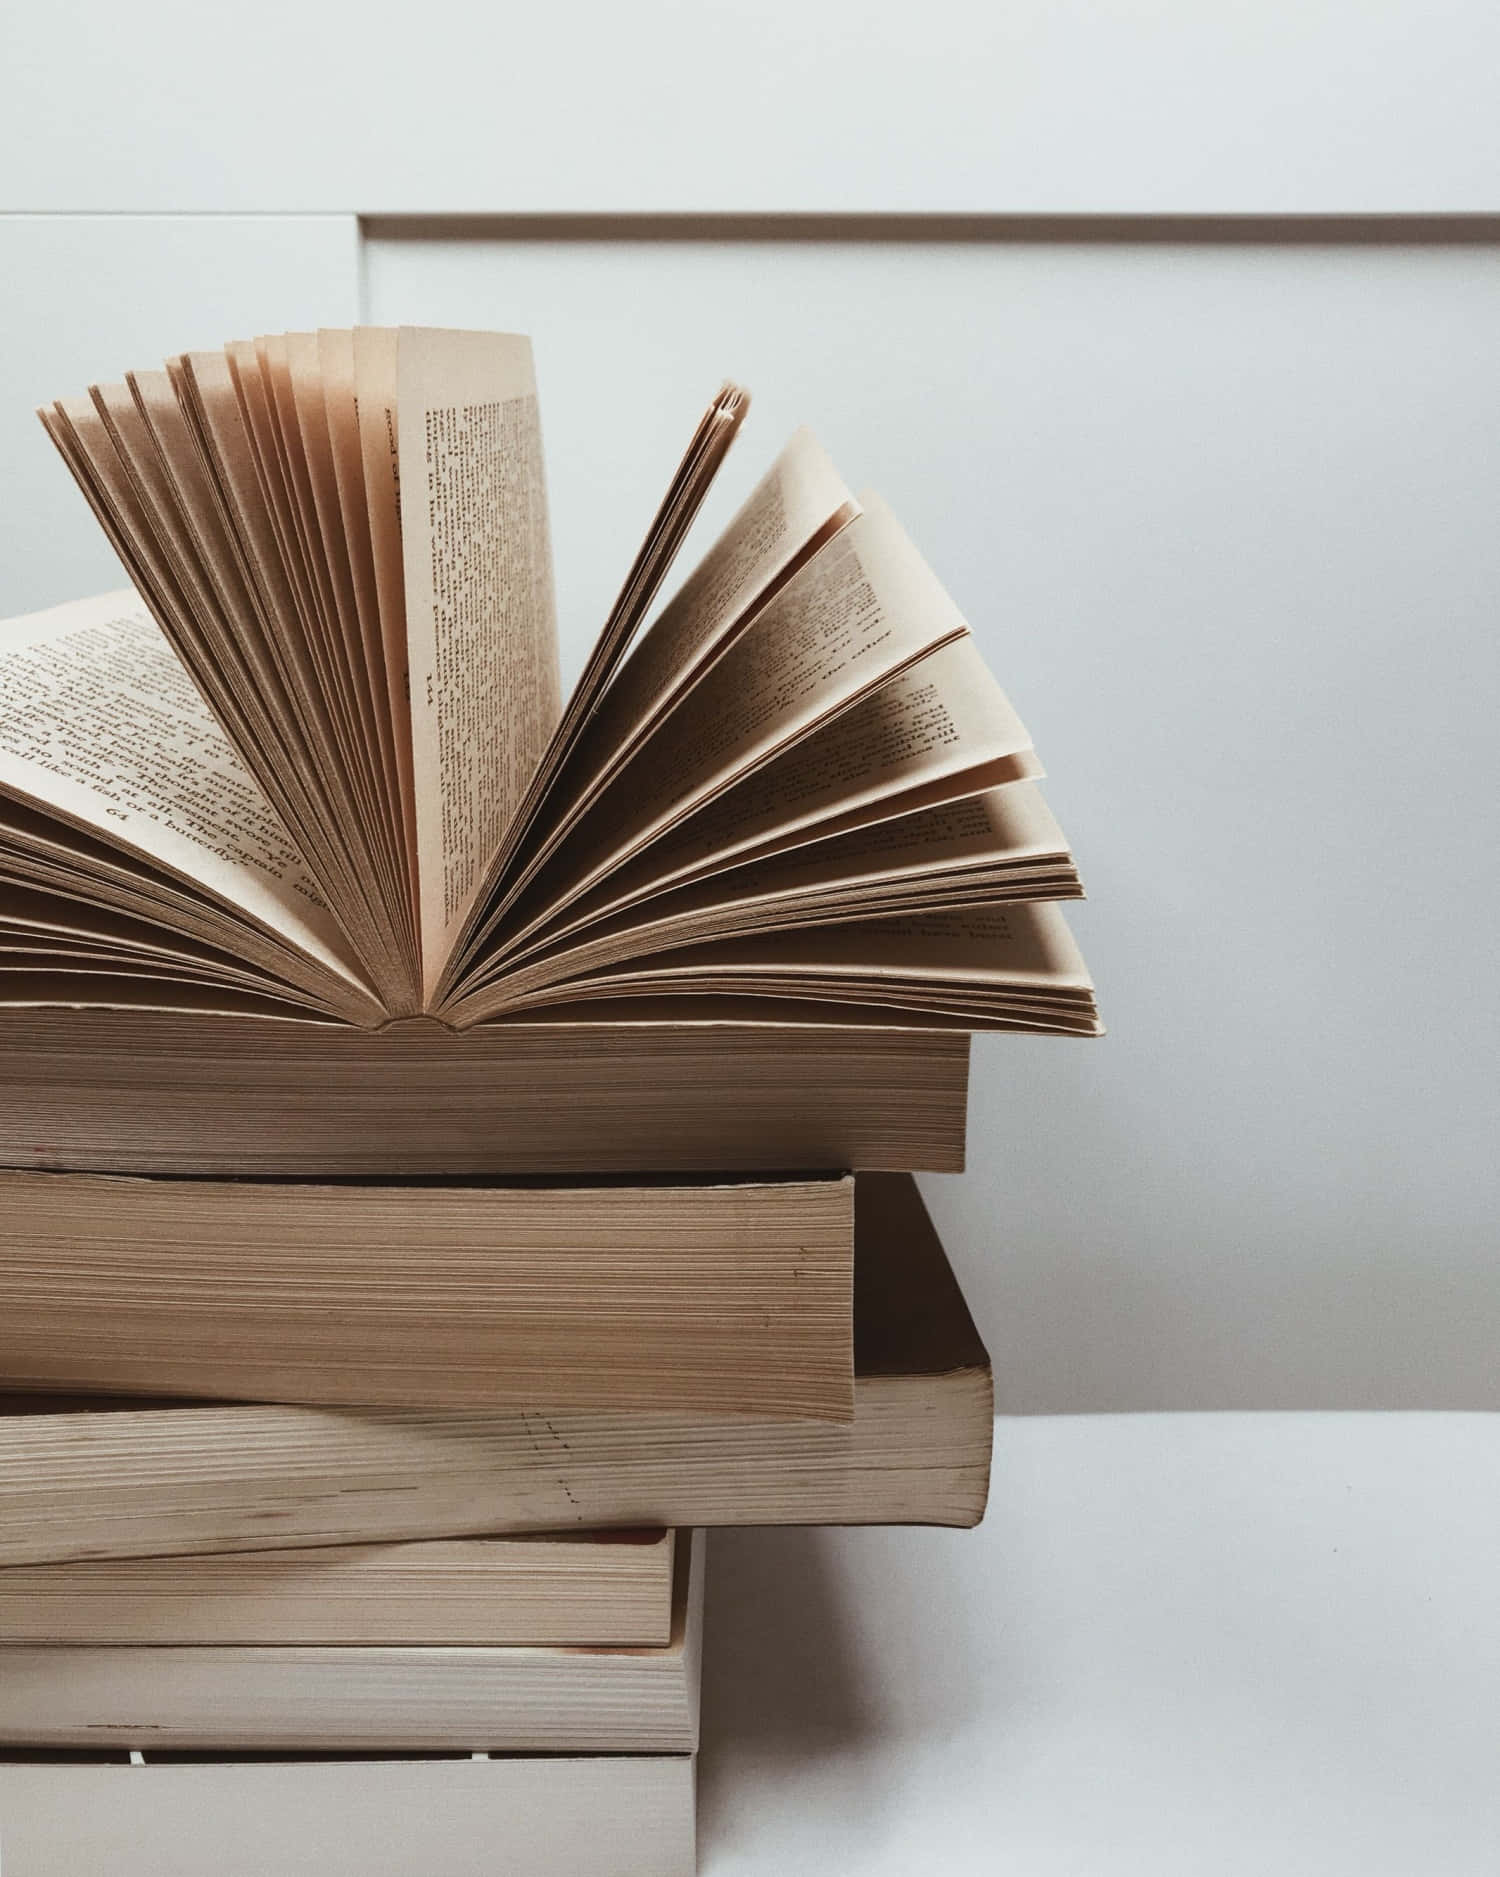 A Author's journey to knowledge starts with a book